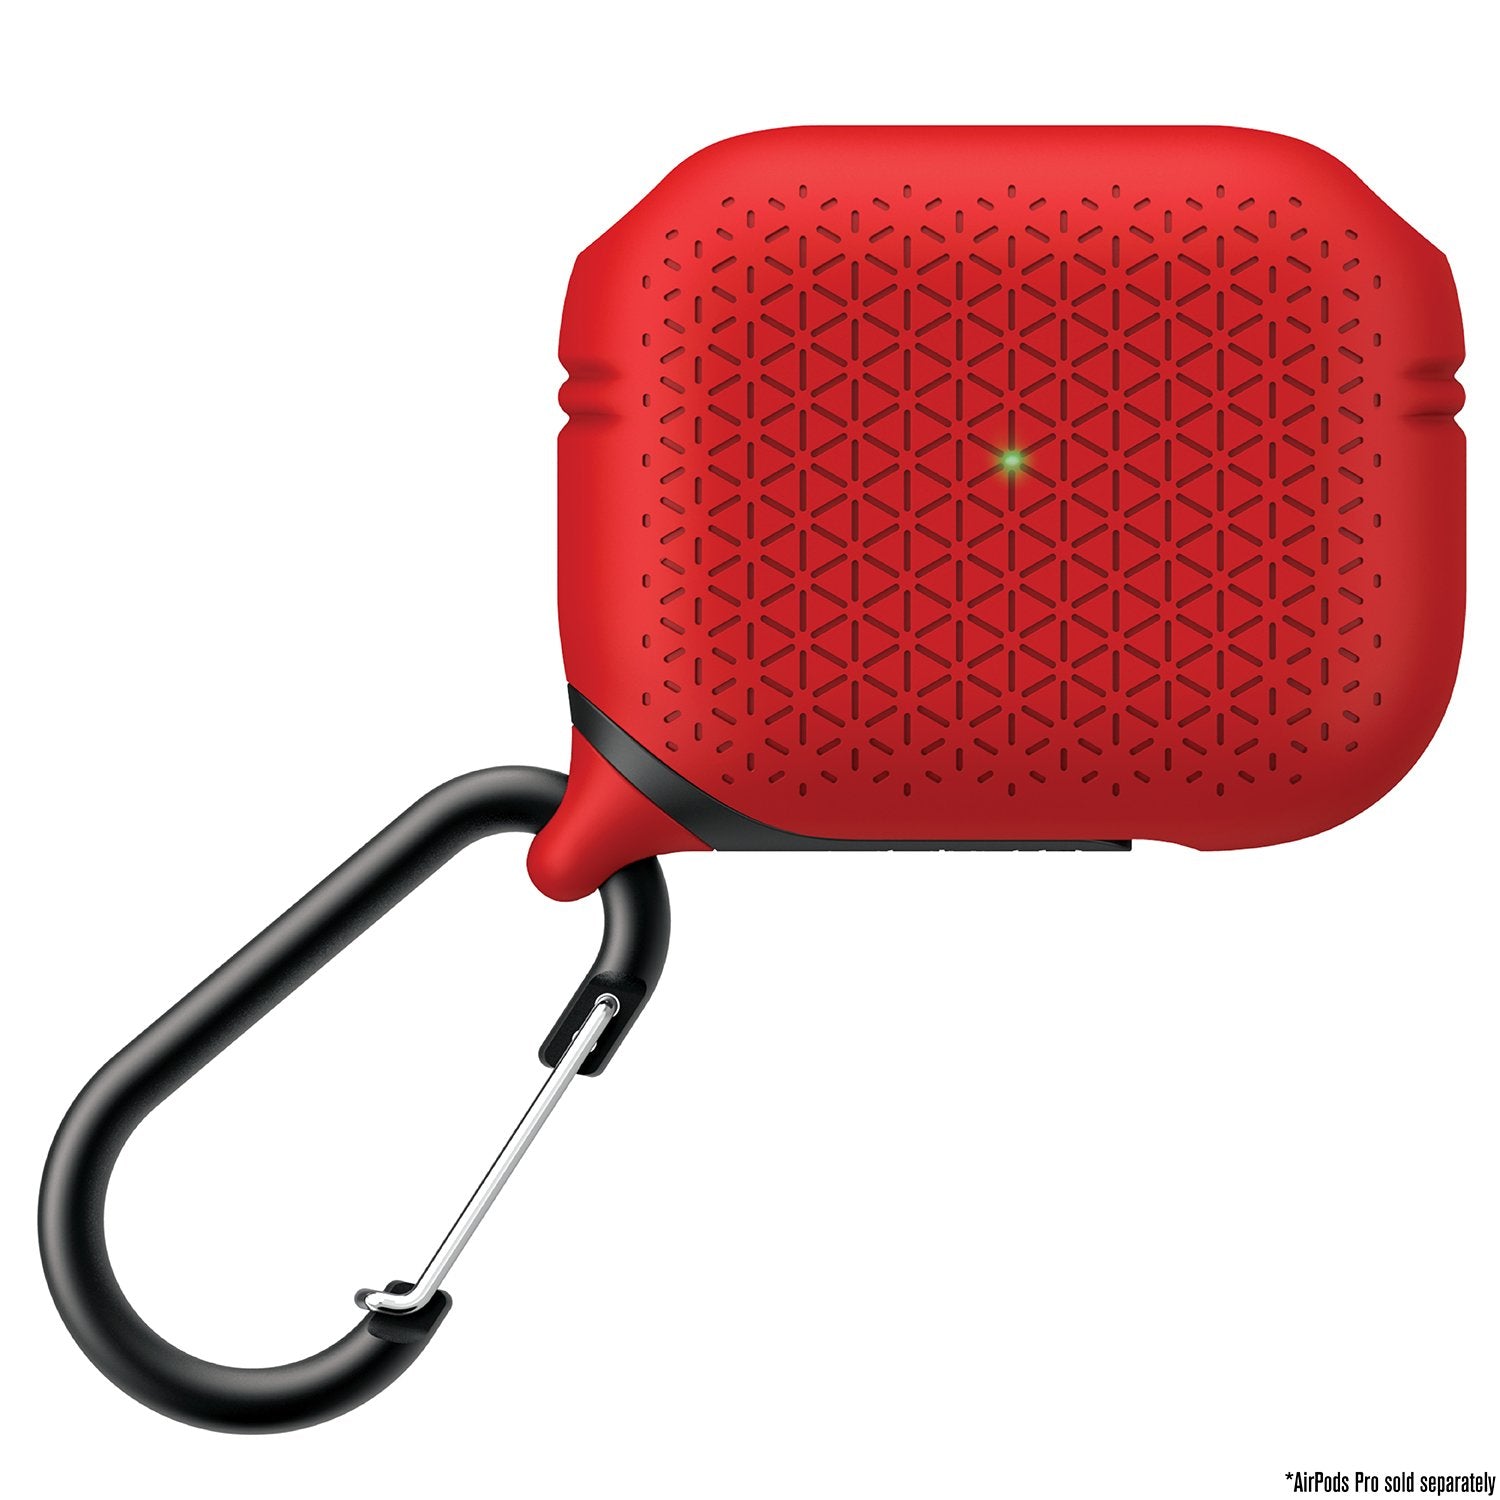 CATAPDPROTEXRED | Premium Waterproof Case for AirPods Pro